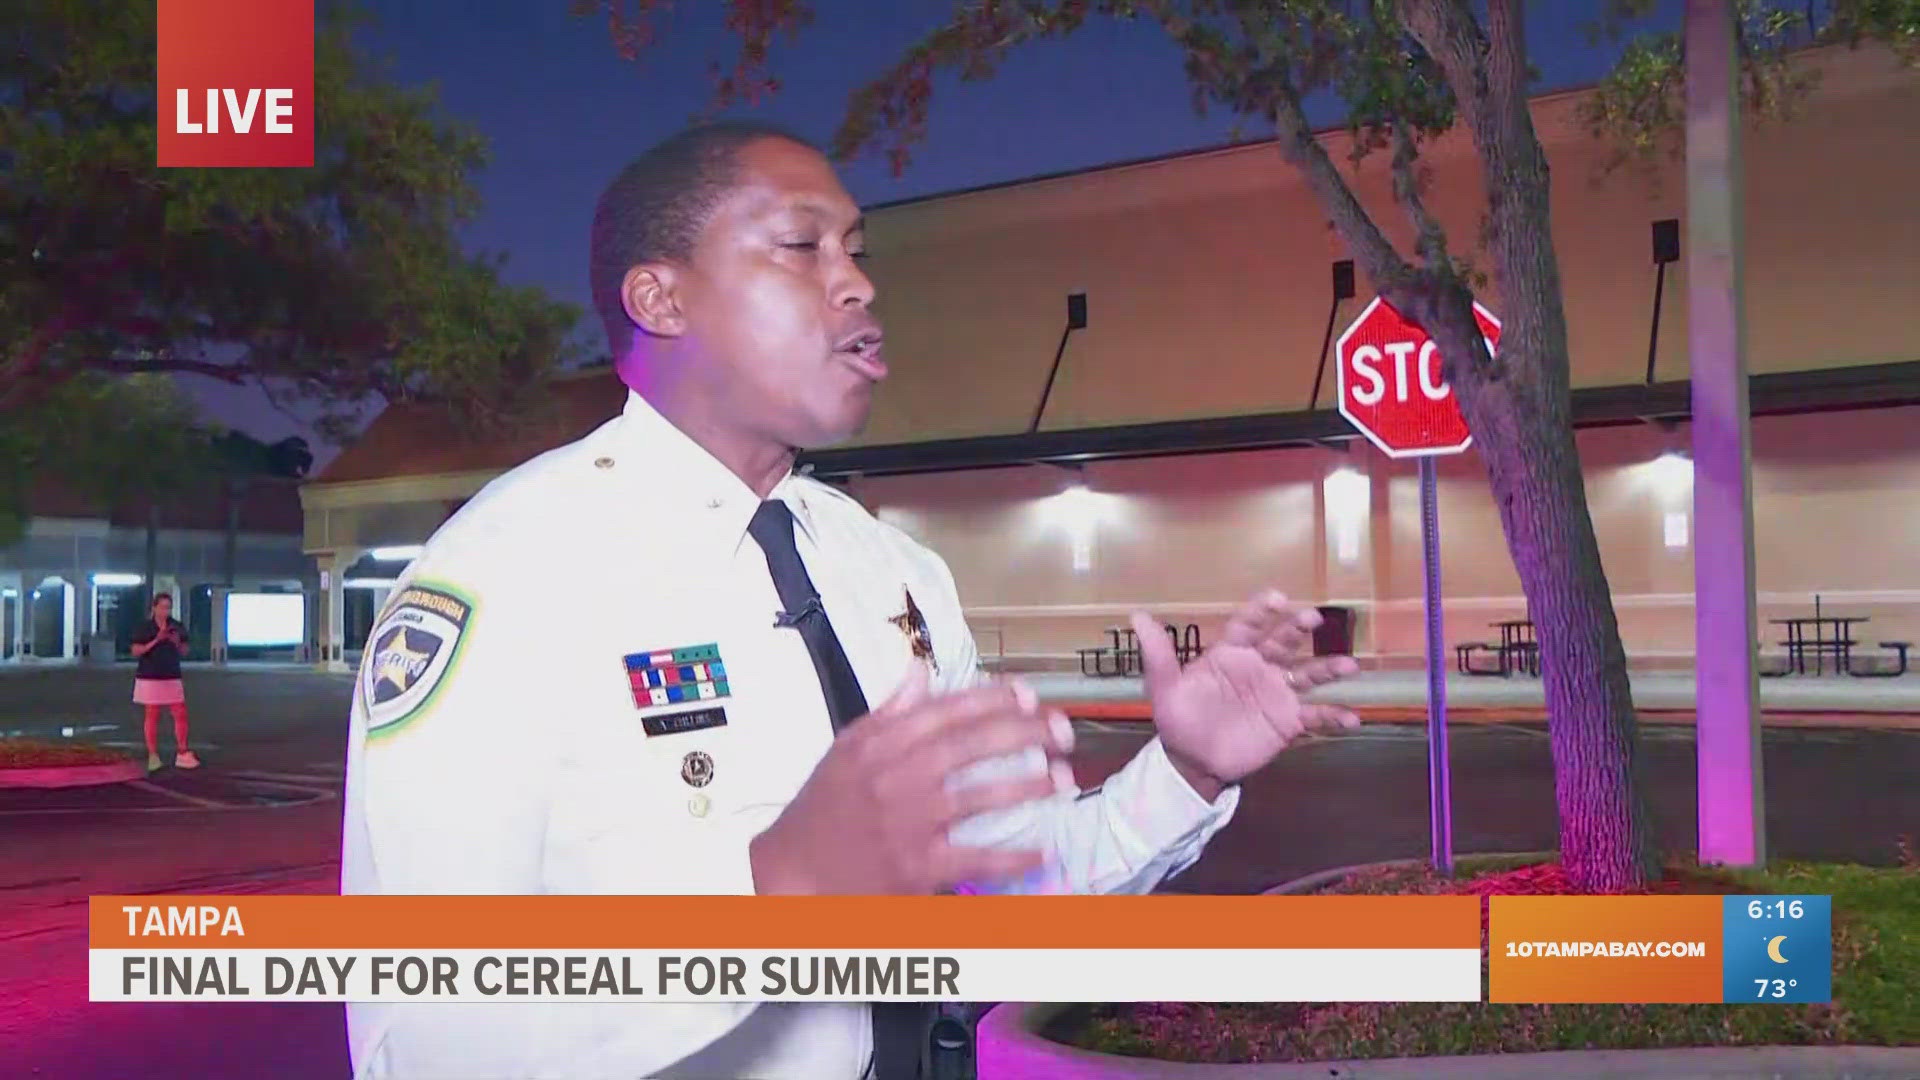 Friday is the last day for the Cereal for Summer drive which collects cash and cereal to provide meals for children in the Tampa Bay area.